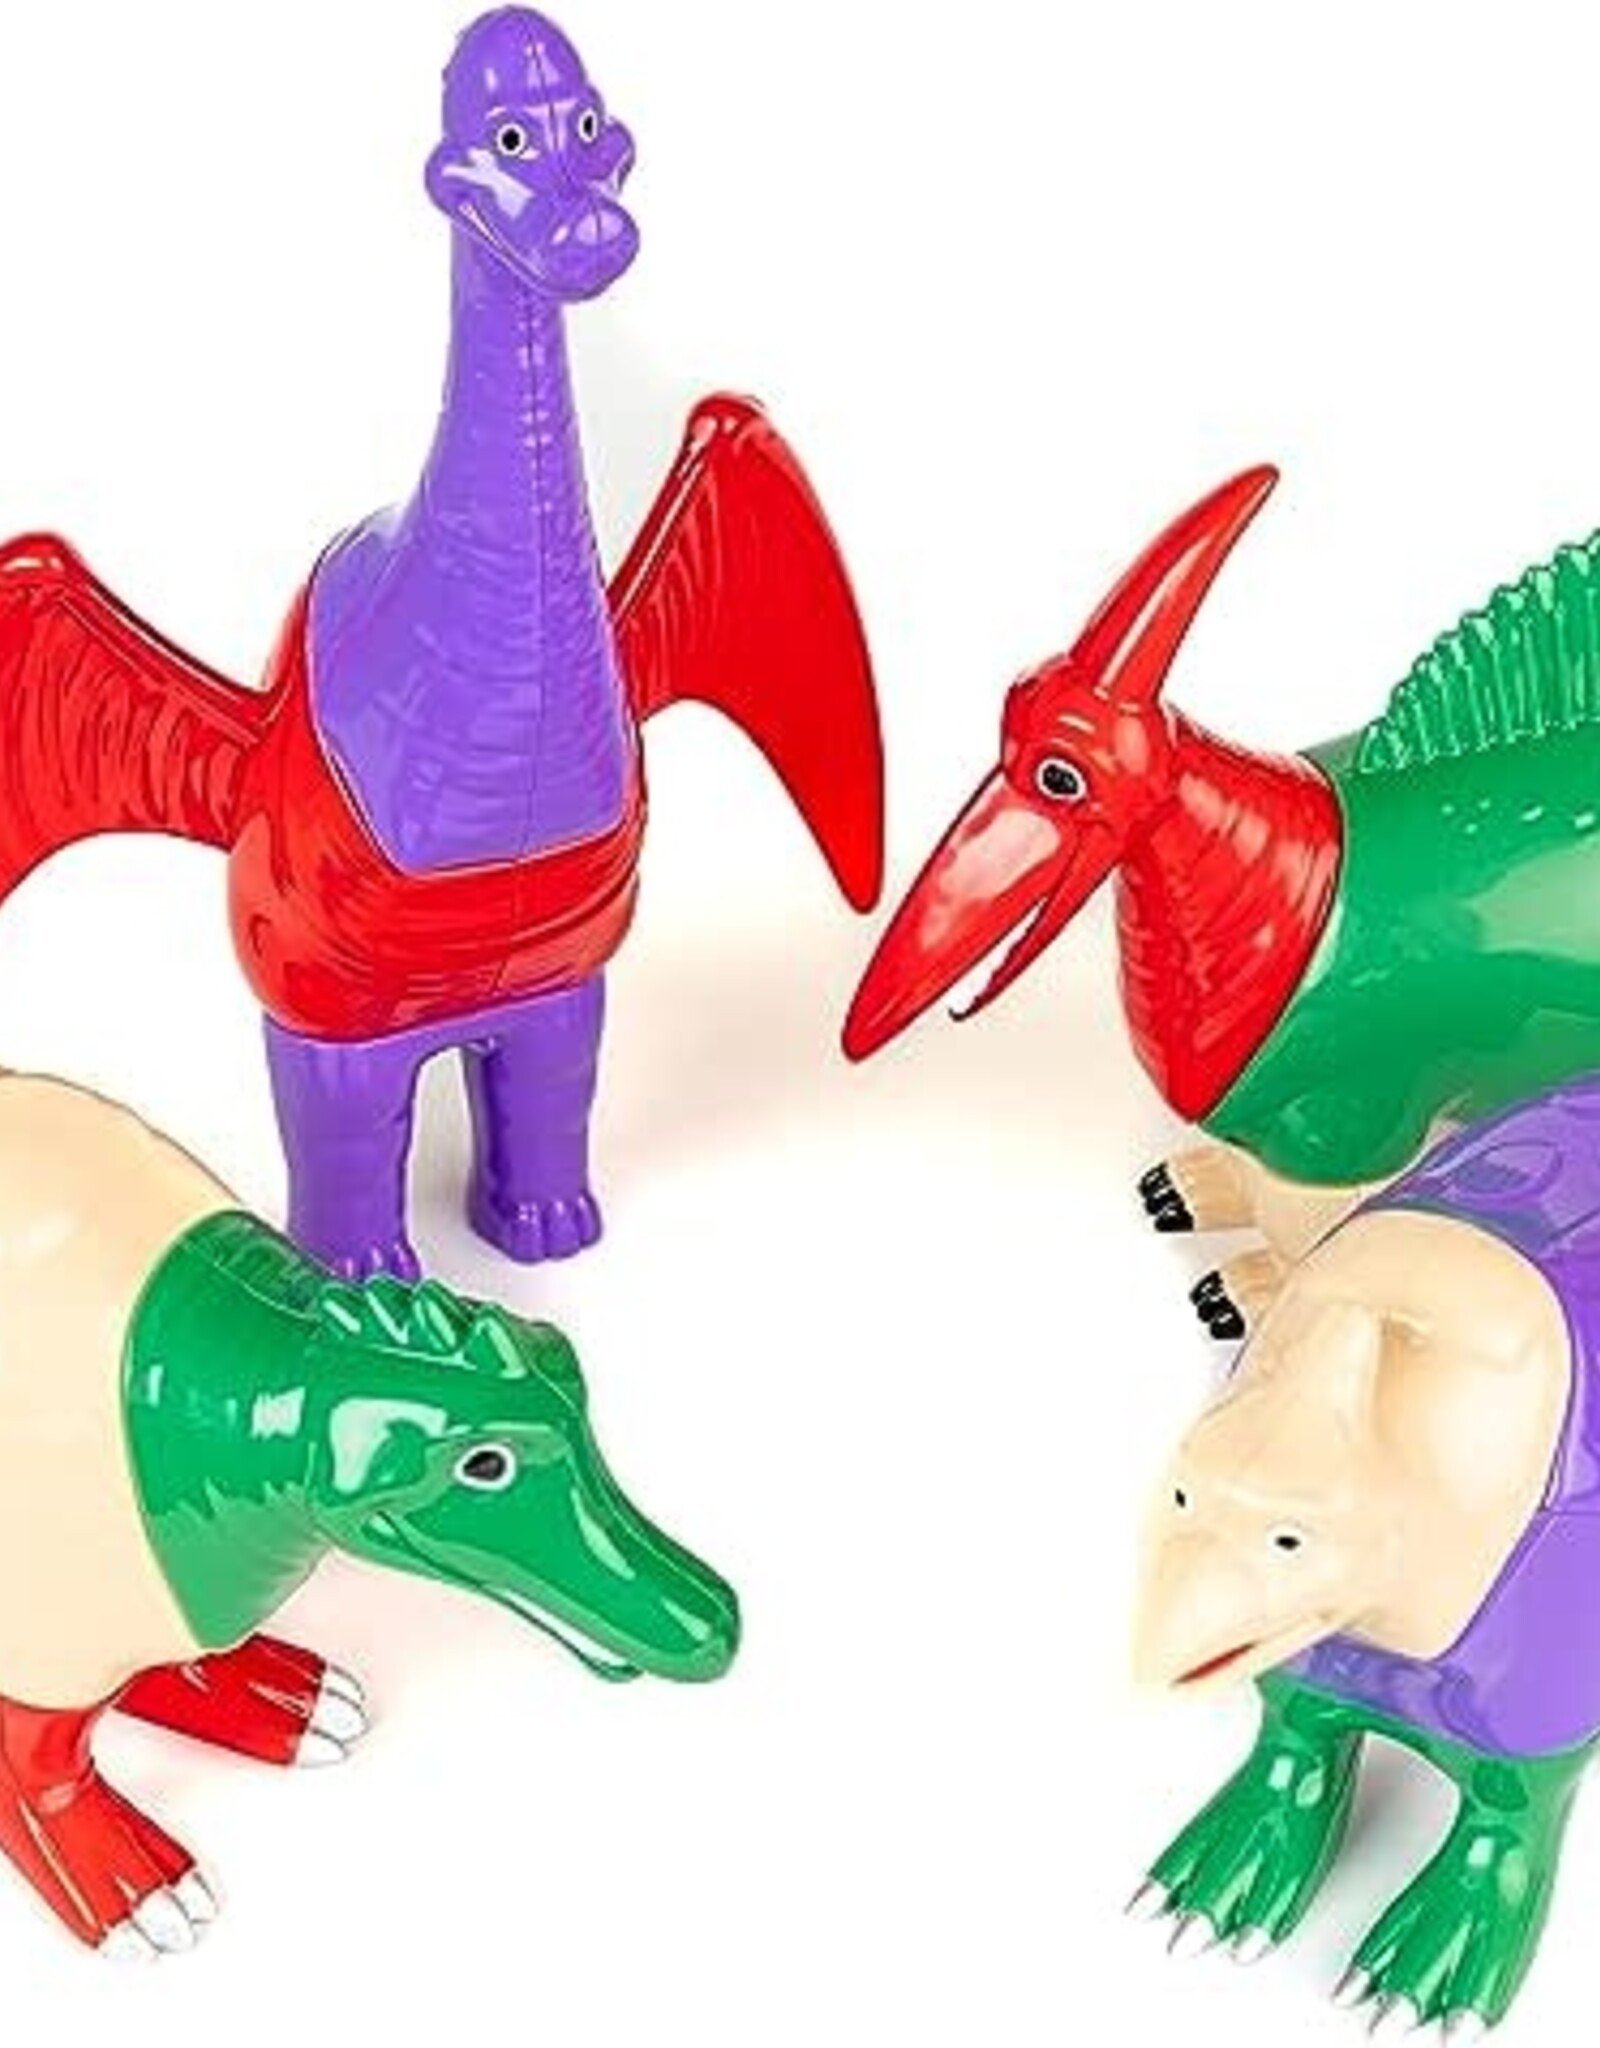 Outset media Mini Mix or Match Dinosaurs 2